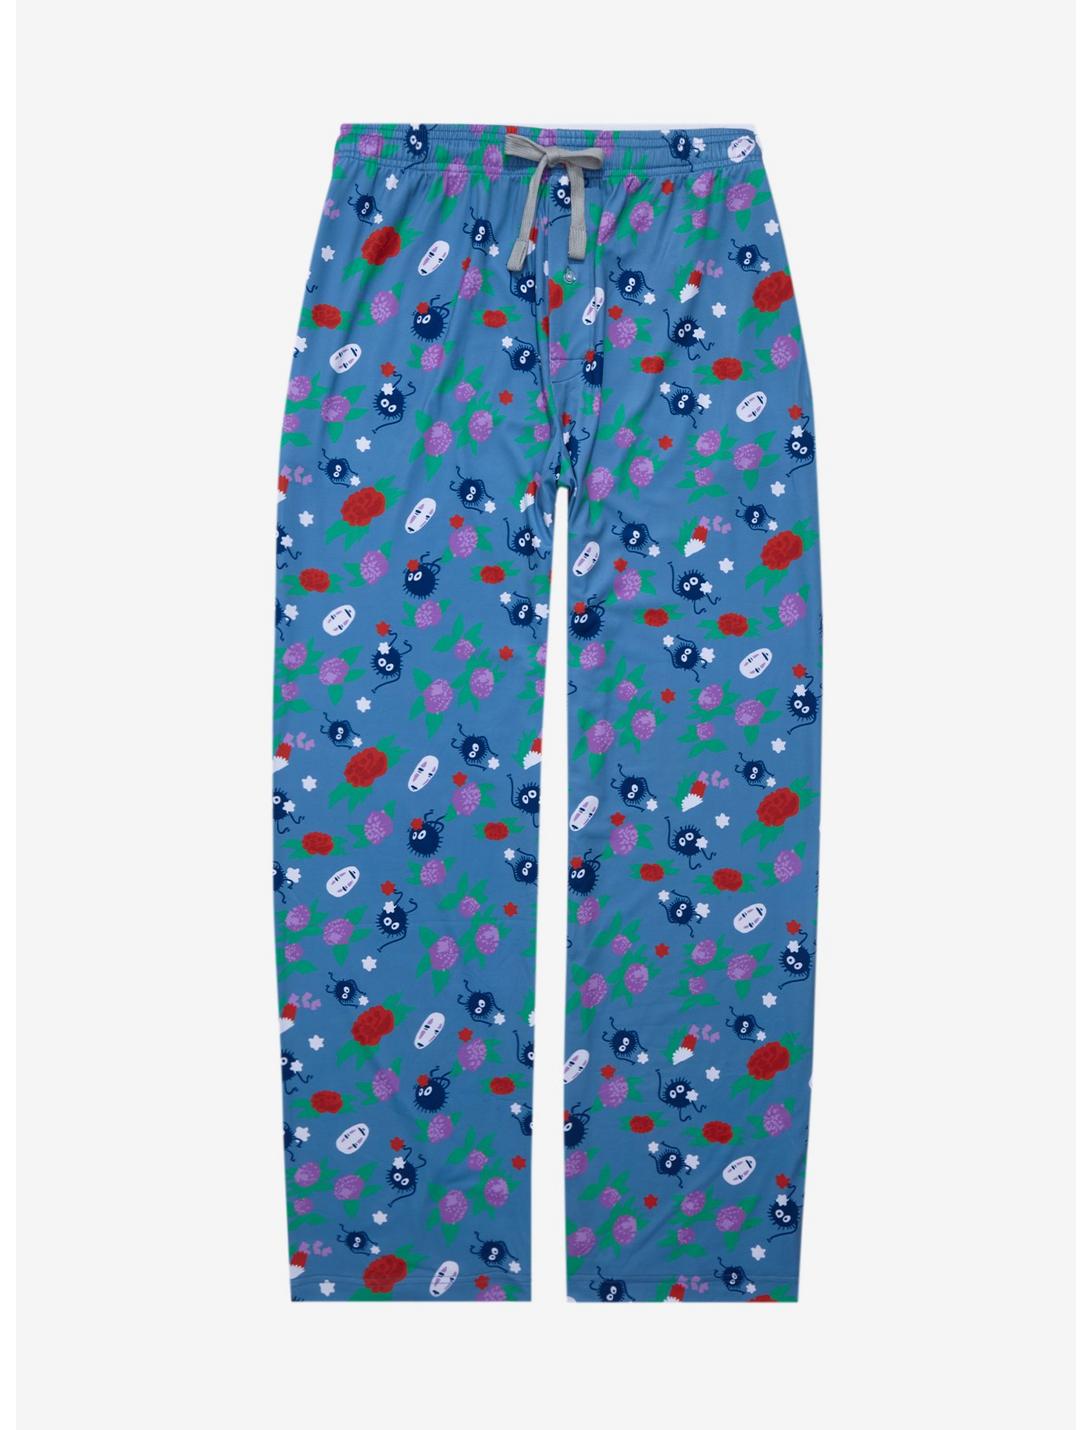 Studio Ghibli Spirited Away No-Face & Soot Sprites Floral Allover Print Sleep Pants - BoxLunch Exclusive, BLUE, hi-res